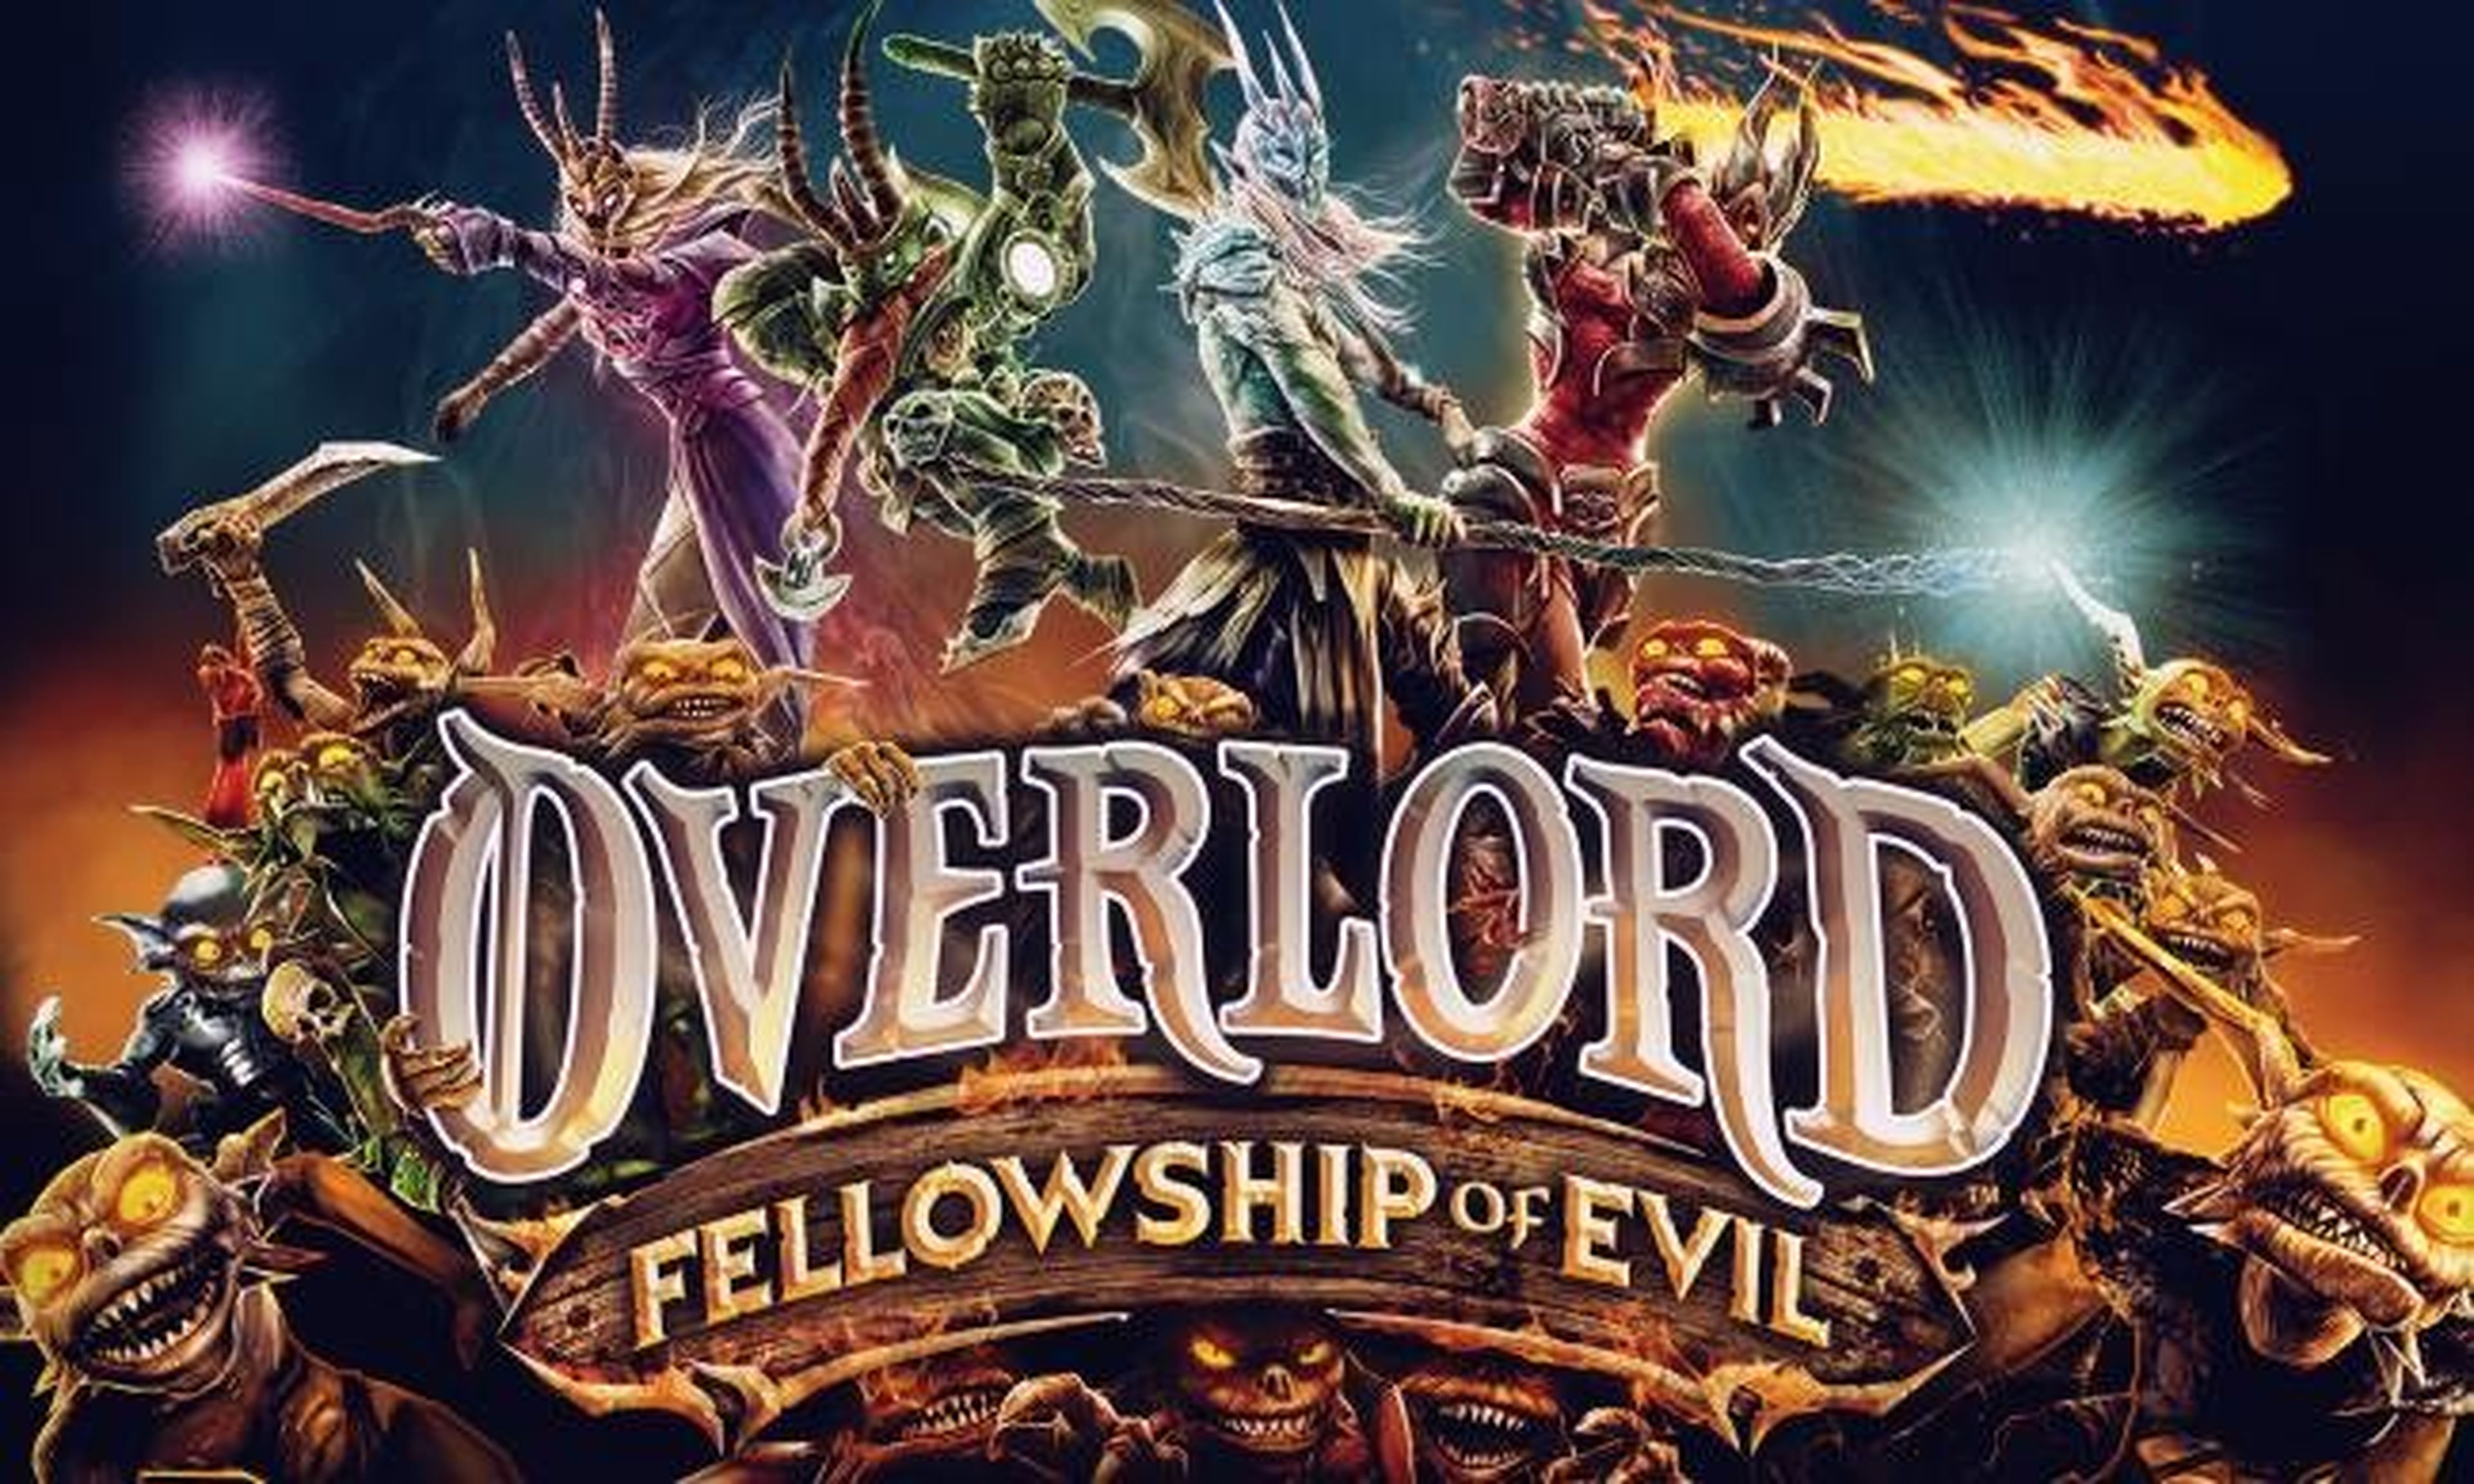 Overlord_ Fellowship of Evil Announcement Trailer